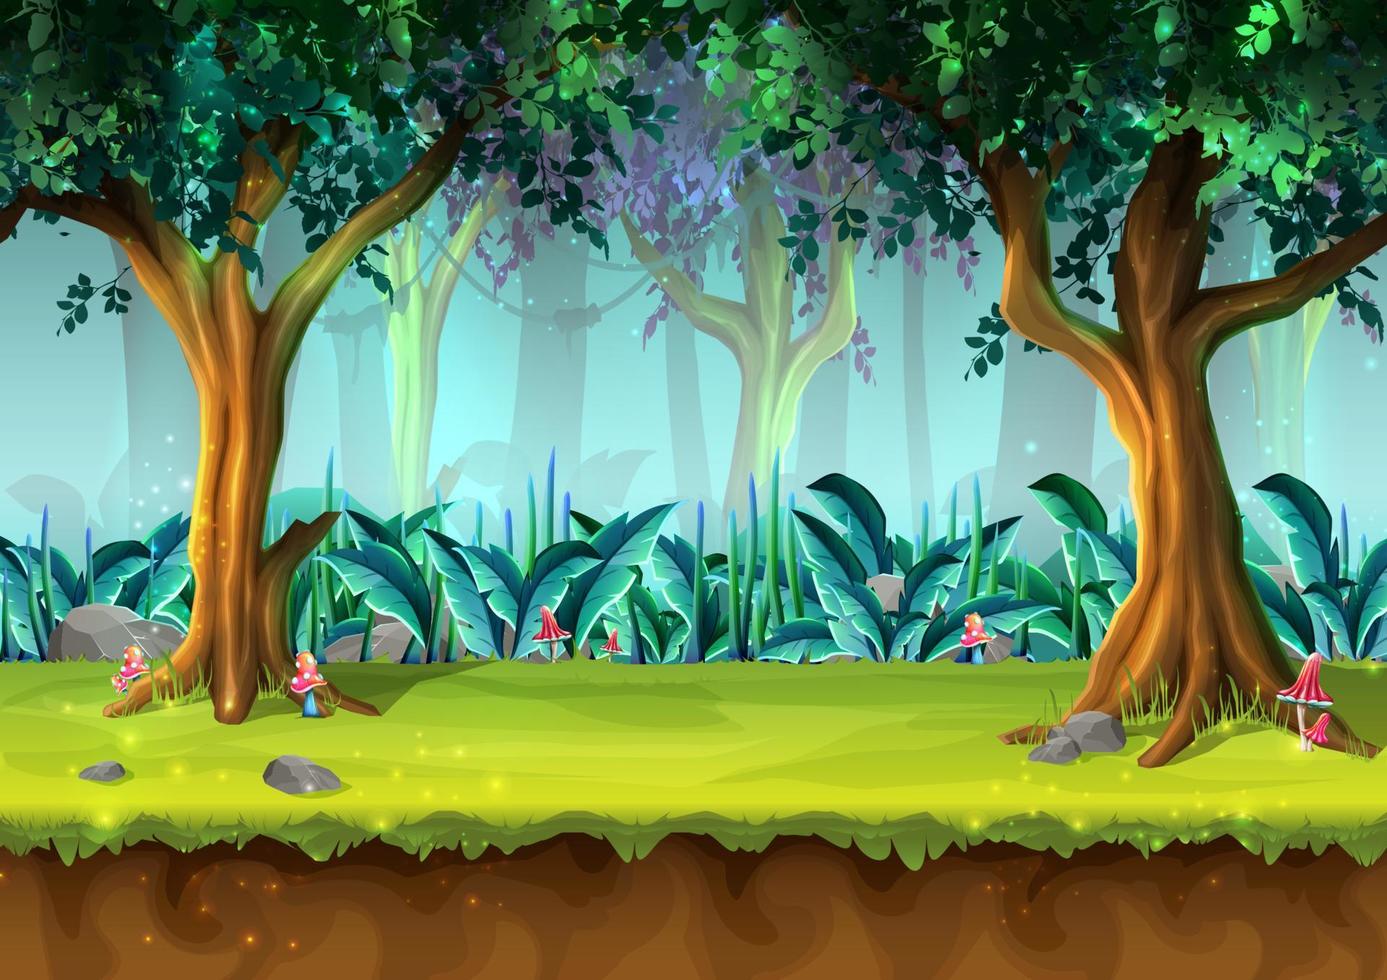 Vector cartoon style mystery rain forest with trees and mushrooms, illustration for game design, app, websites.